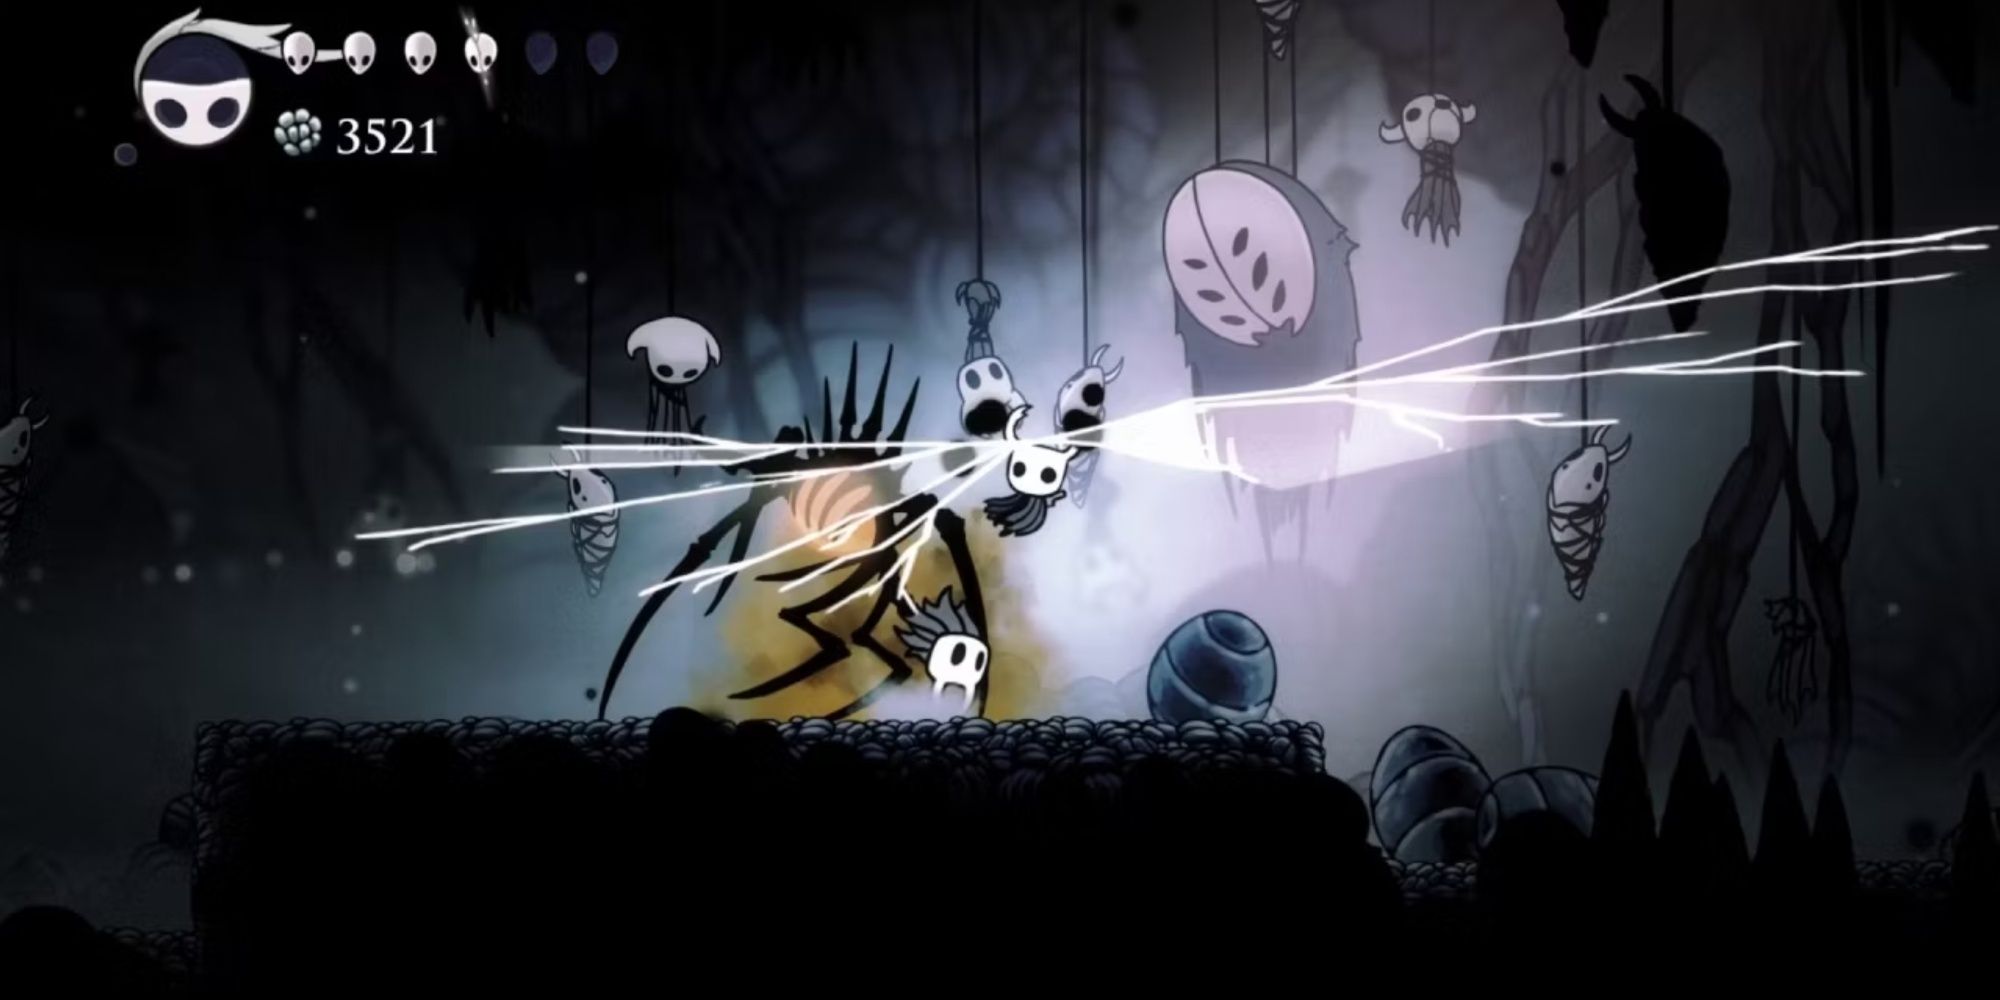 The Knight fighting a boss in Deepnest in Hollow Knight